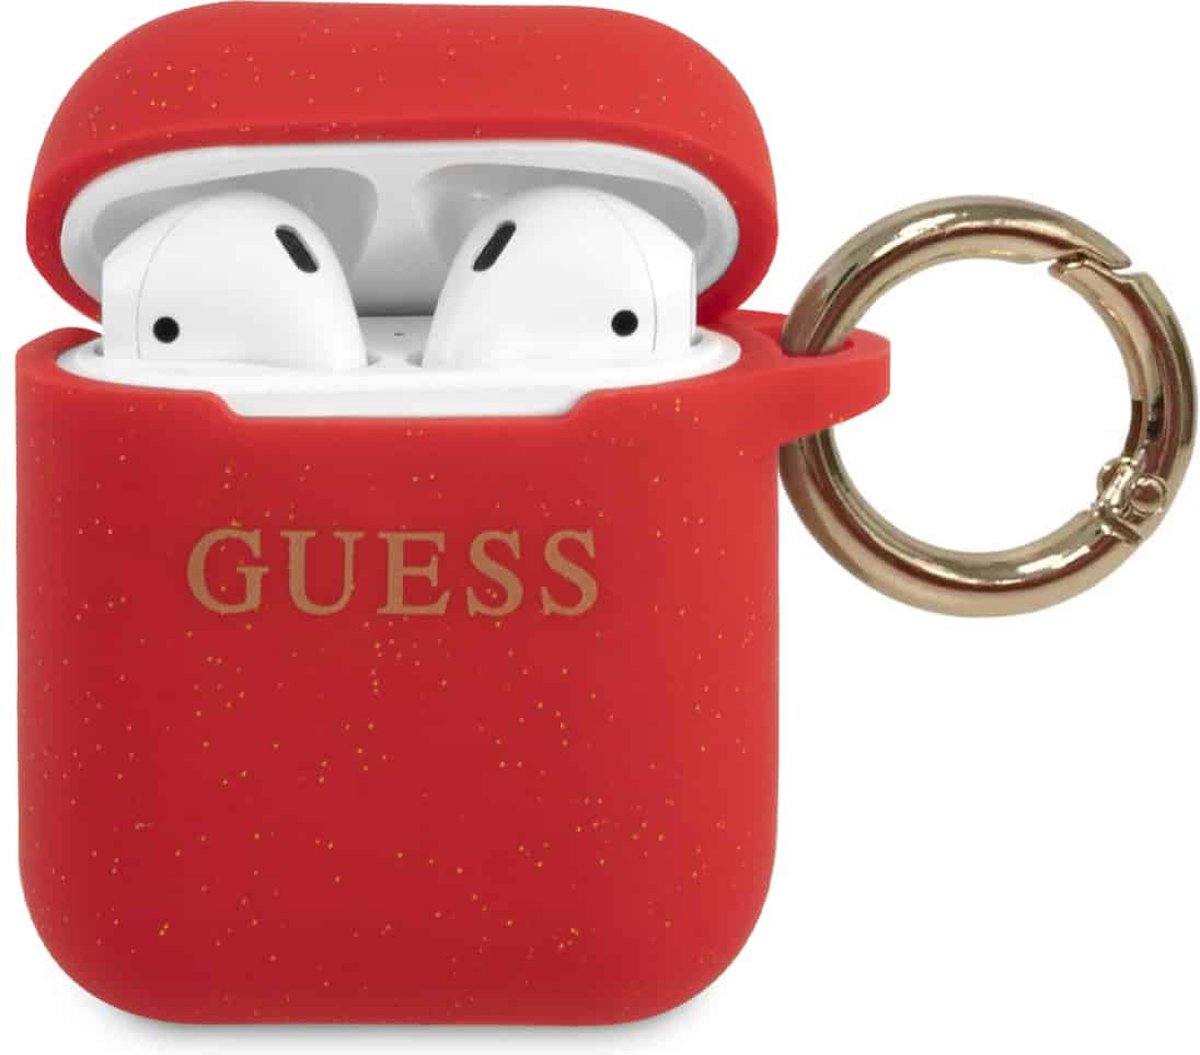 GUESS Silicone Case AirPods 1 / AirPods 2 - Rood